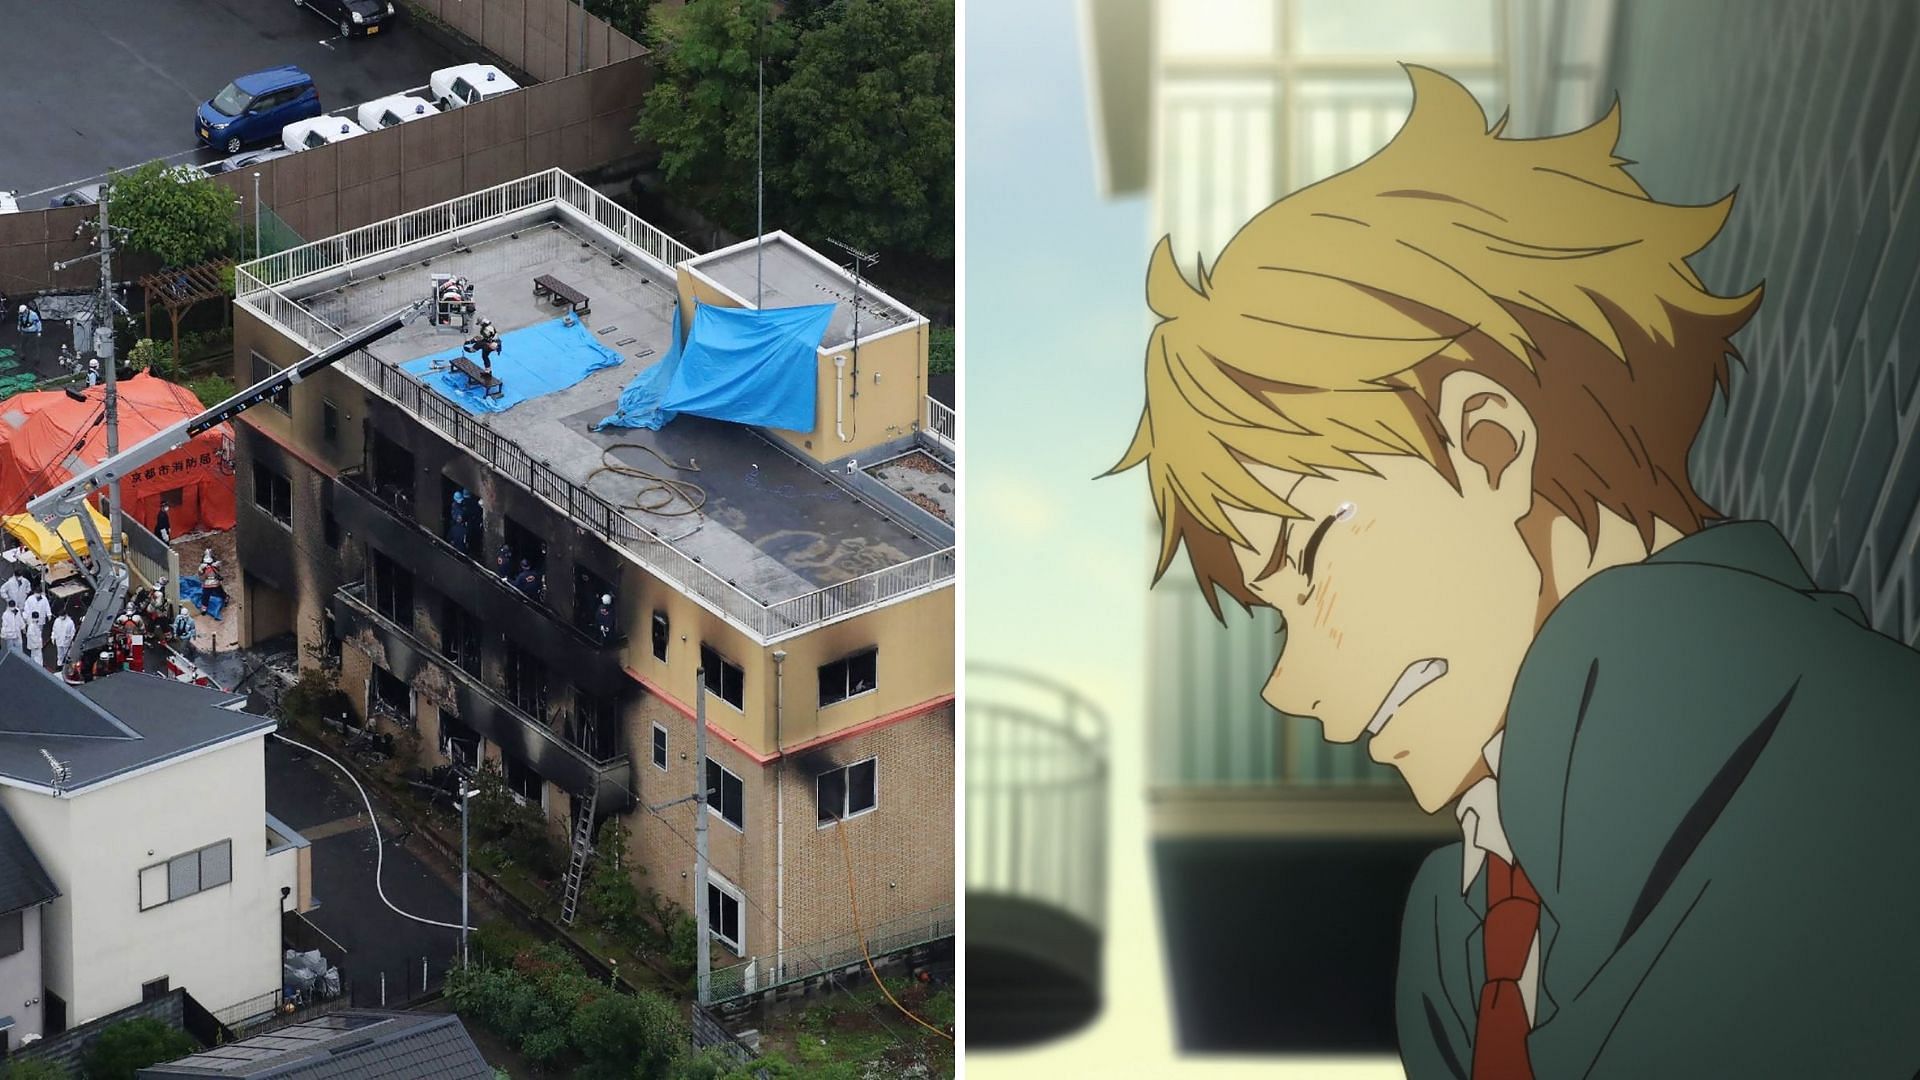 KyoAni fire arson attack at Kyoto Animation studio in Japan  YouTube